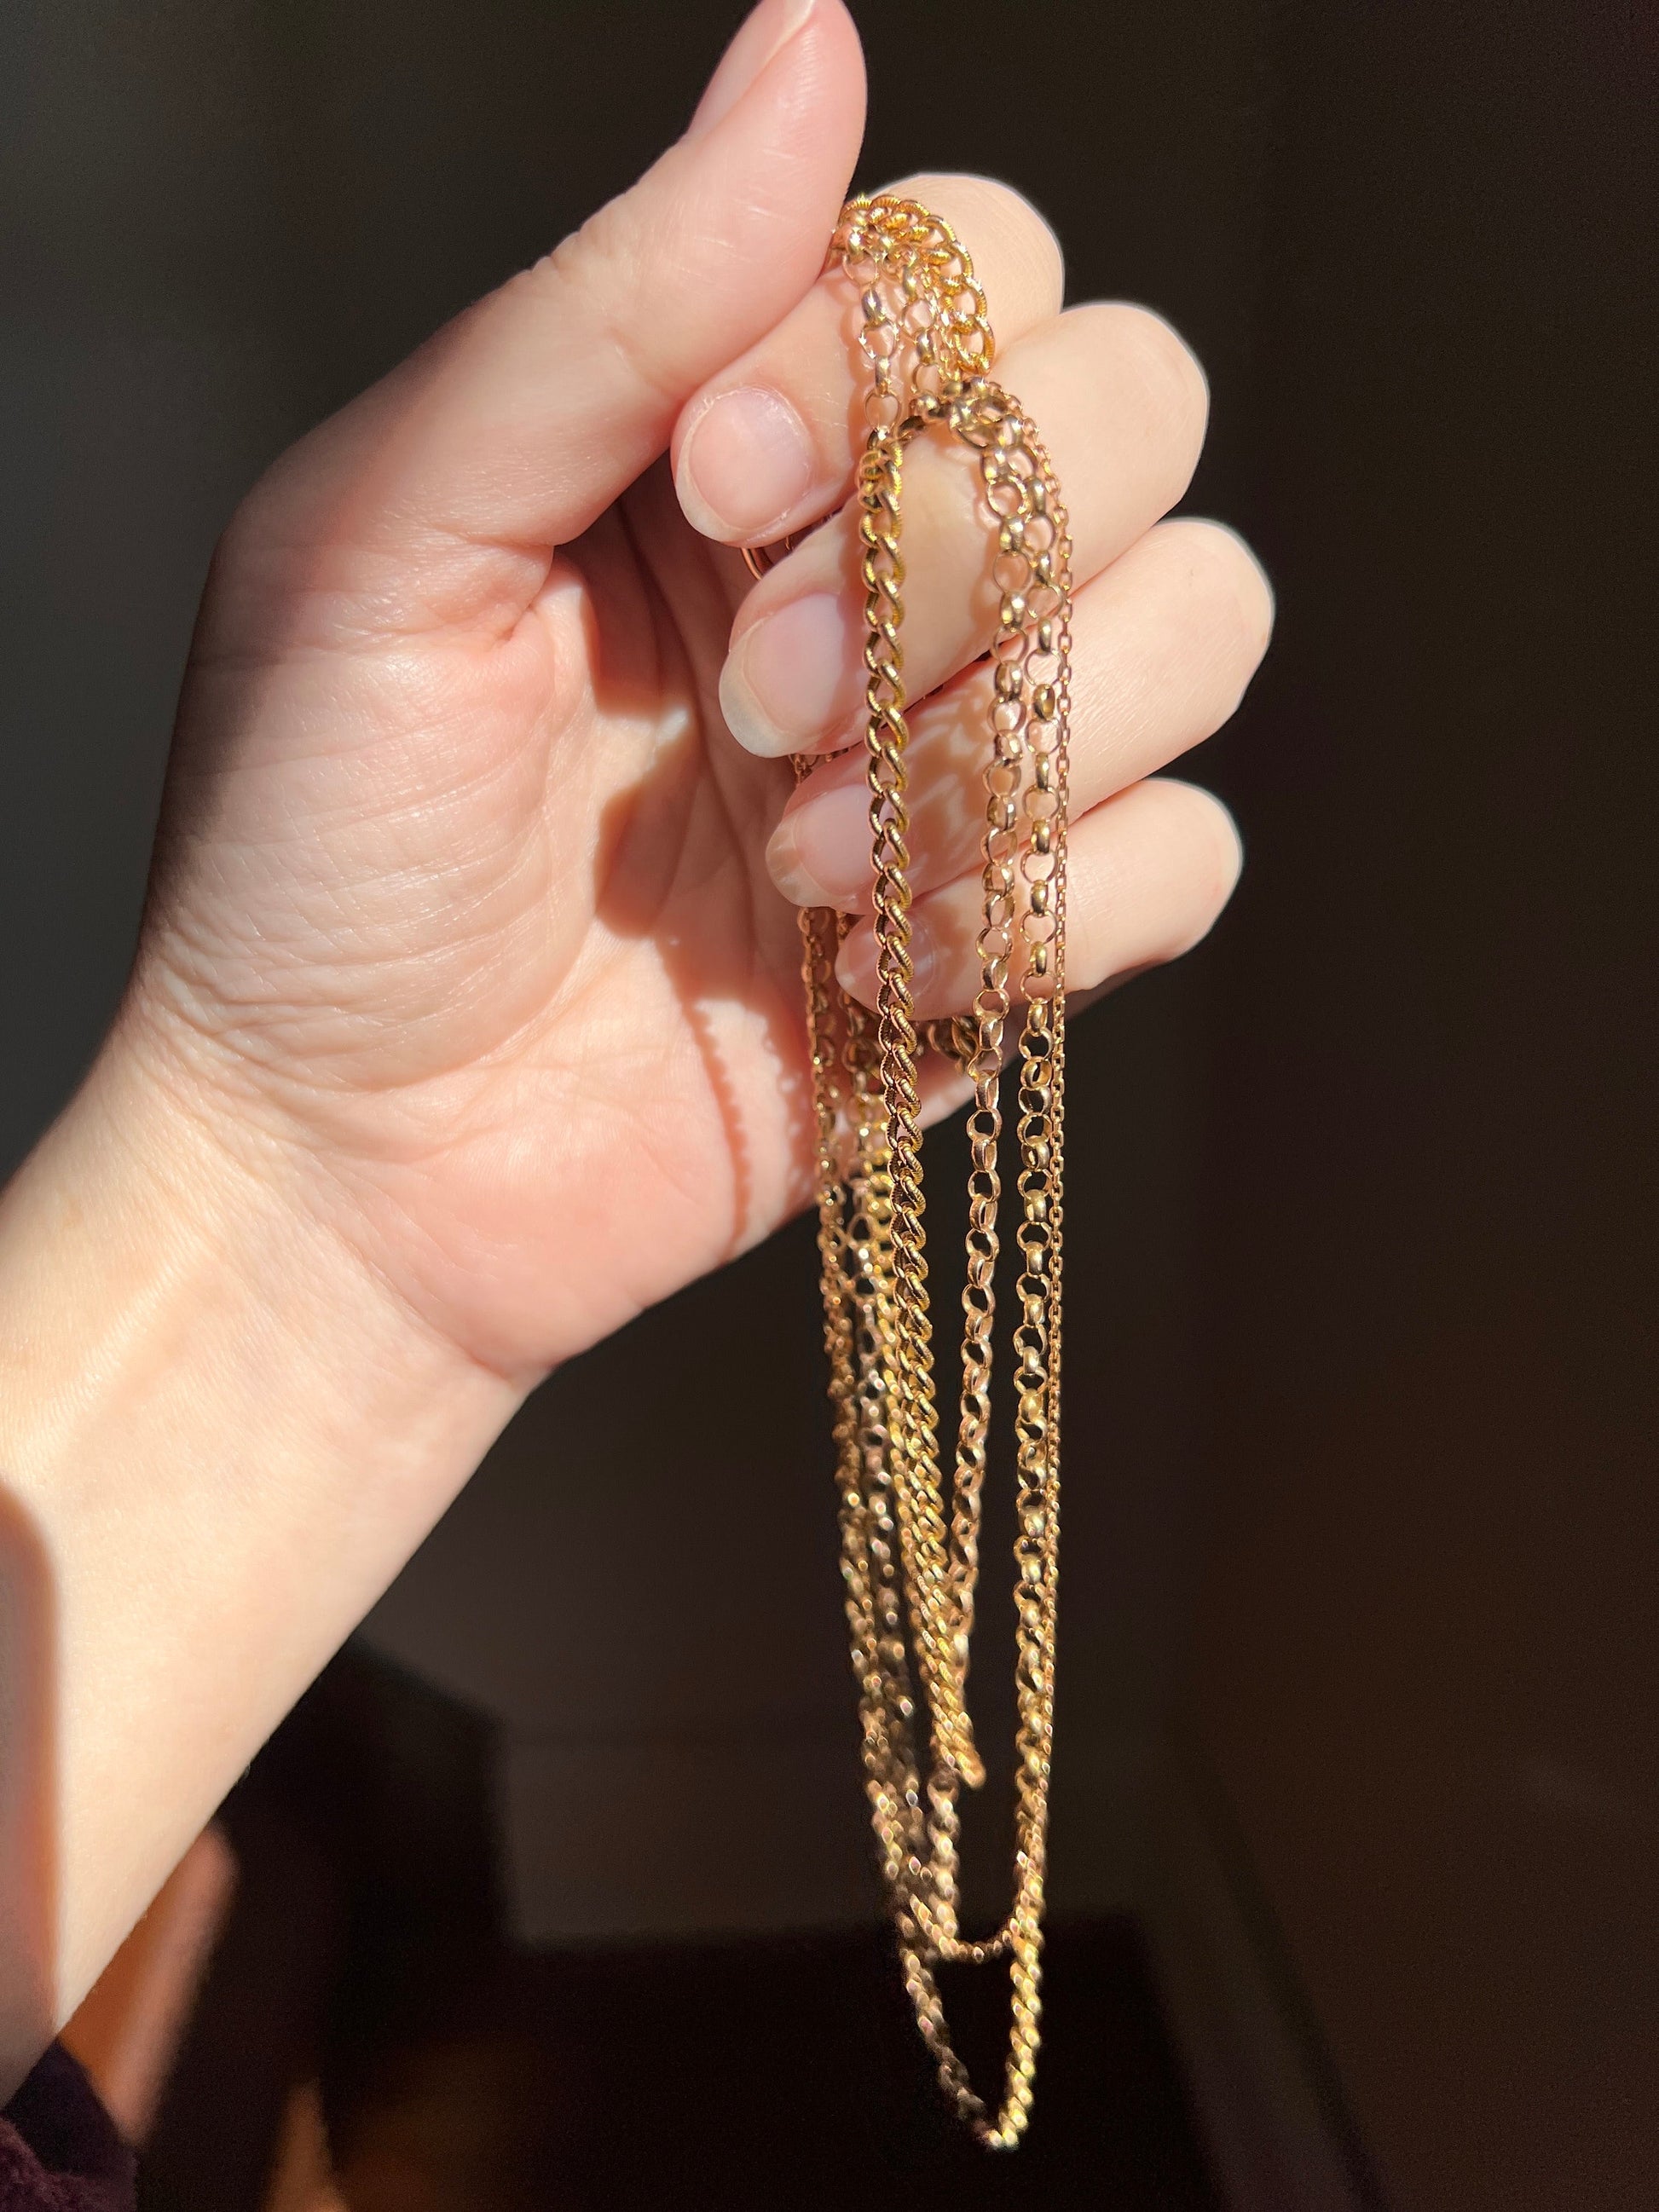 ANTIQUE 14k Rose Gold CHAIN Necklace GEORGIAN - Early Victorian Era Rolo Link Solid Neckmess Neckstack Layering Pendant Holder Romantic Gift